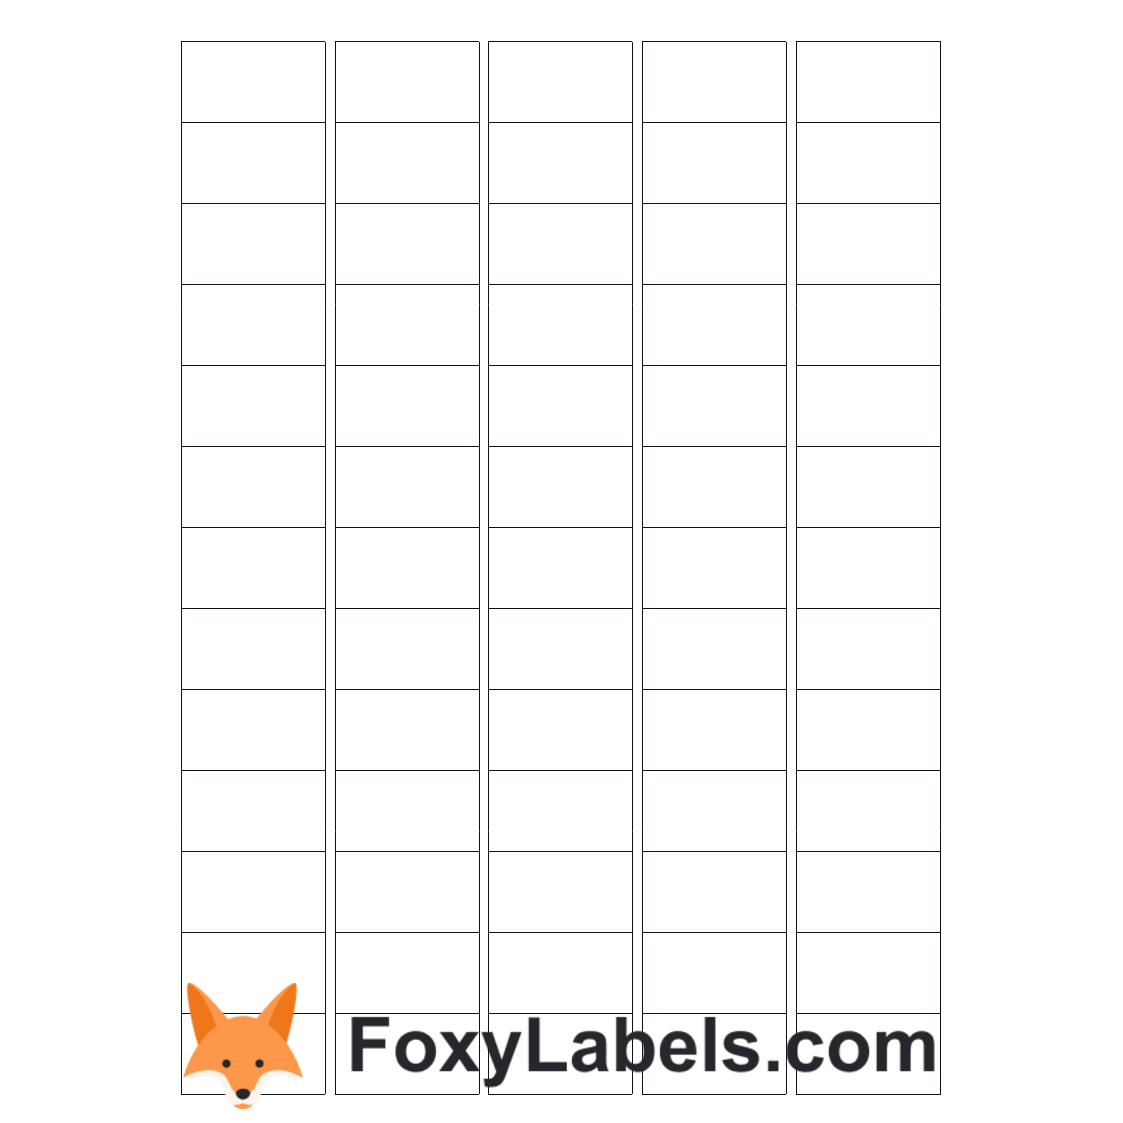 Avery-Zweckform L4793 label template for Google Docs